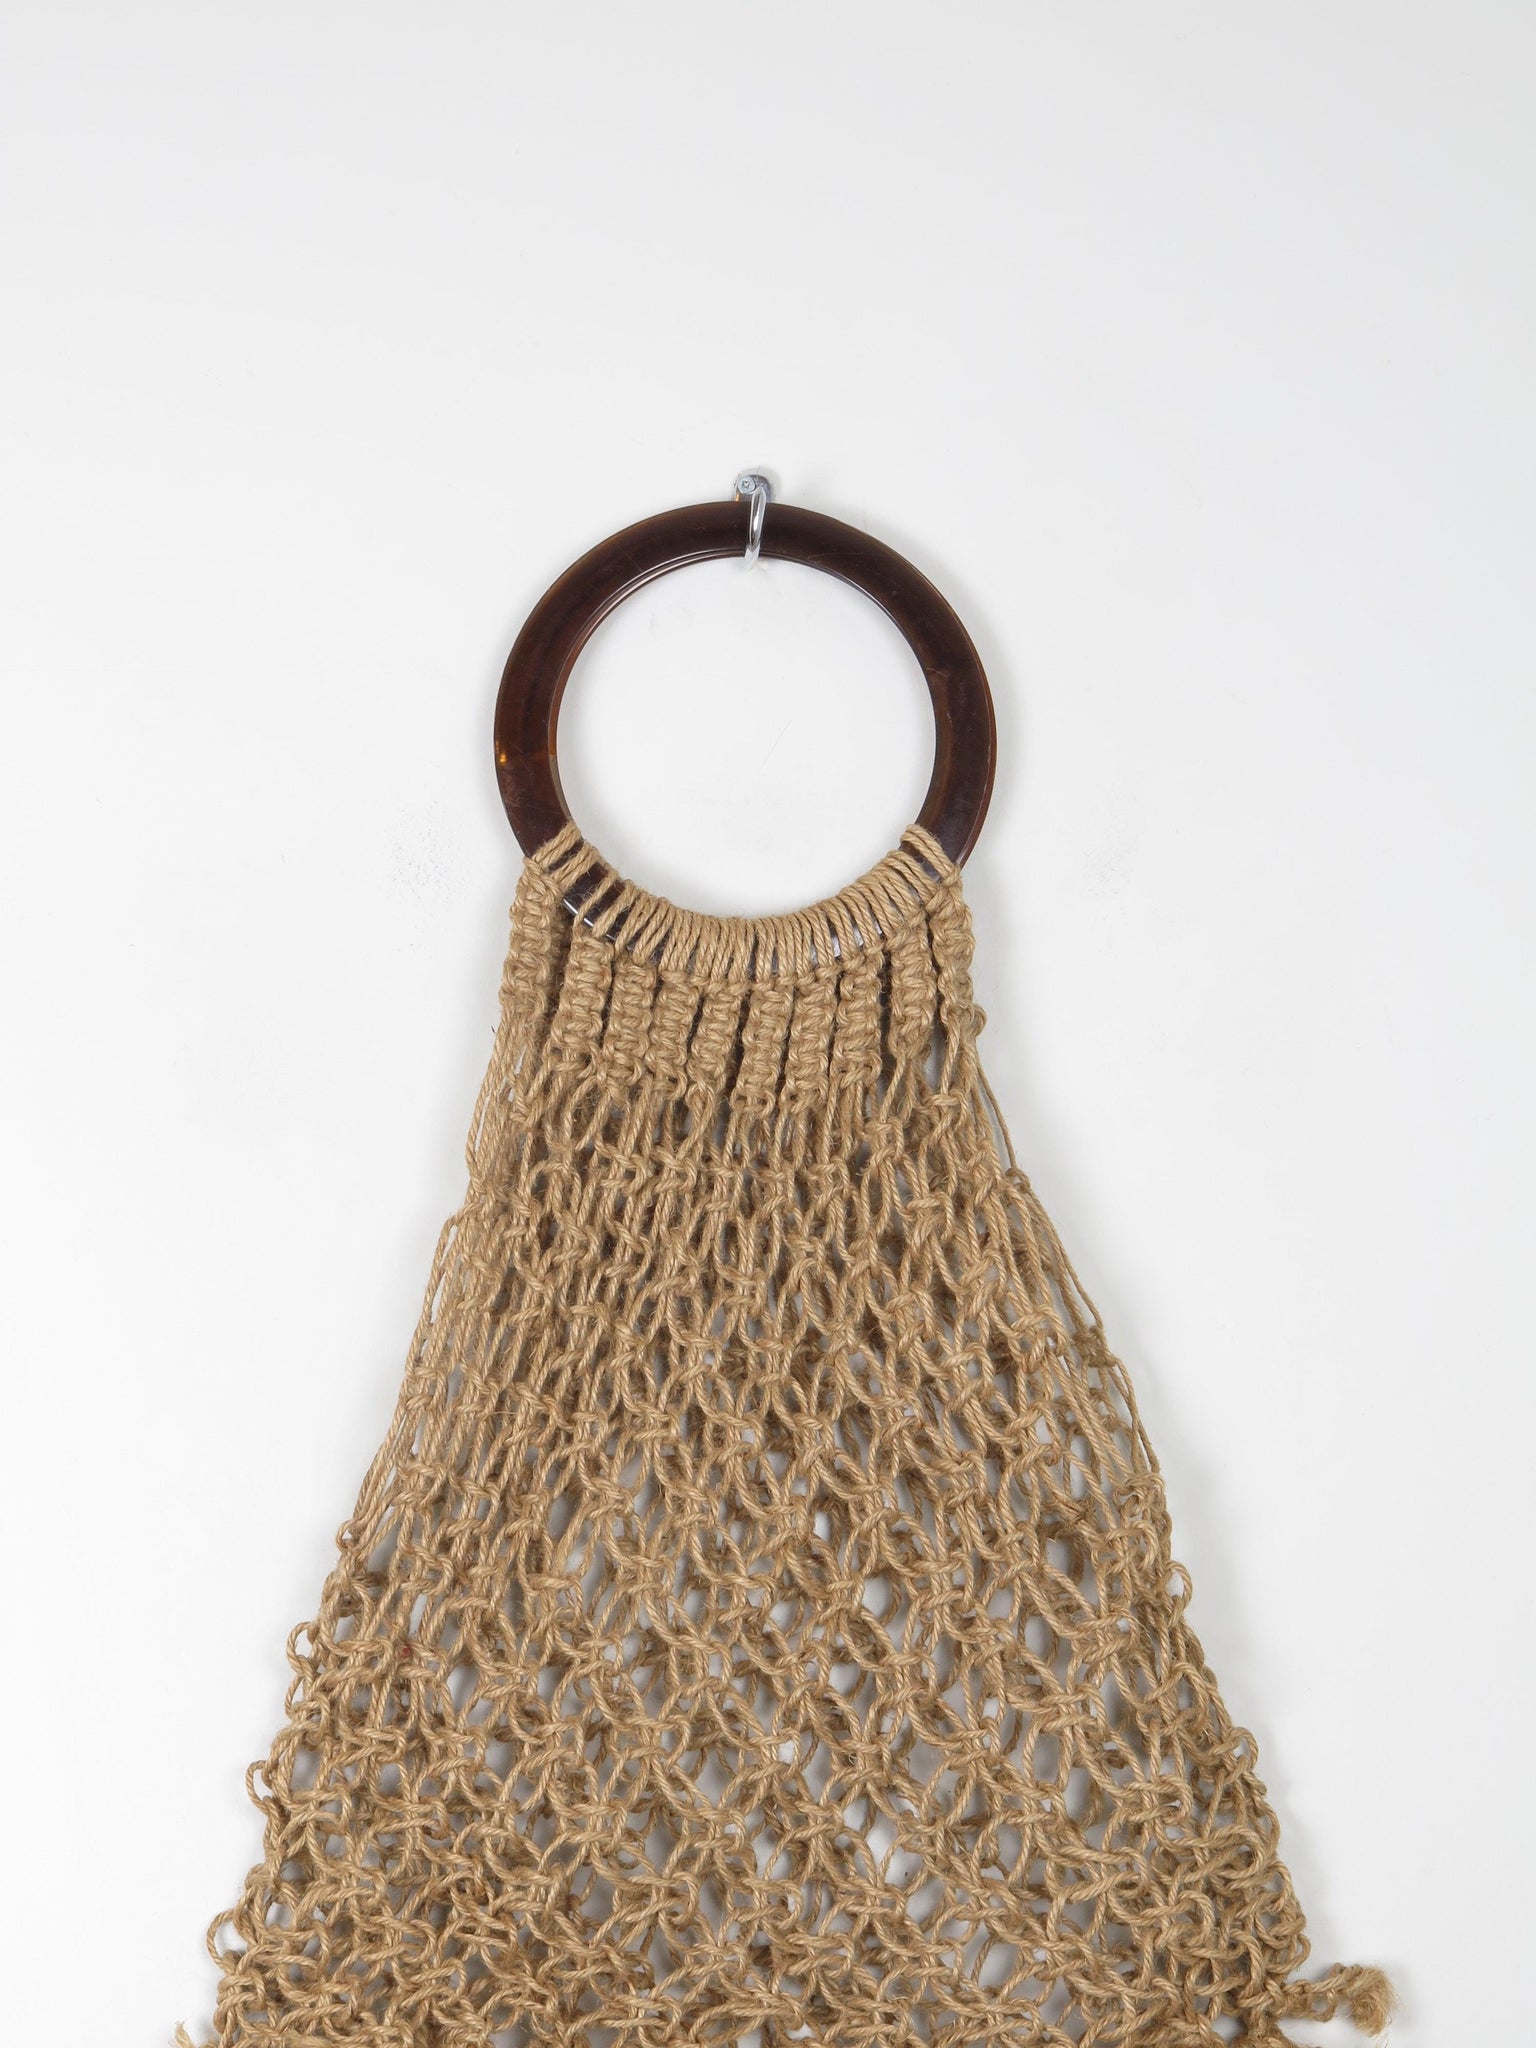 1970s Crochet Straw Bag With Handle - The Harlequin